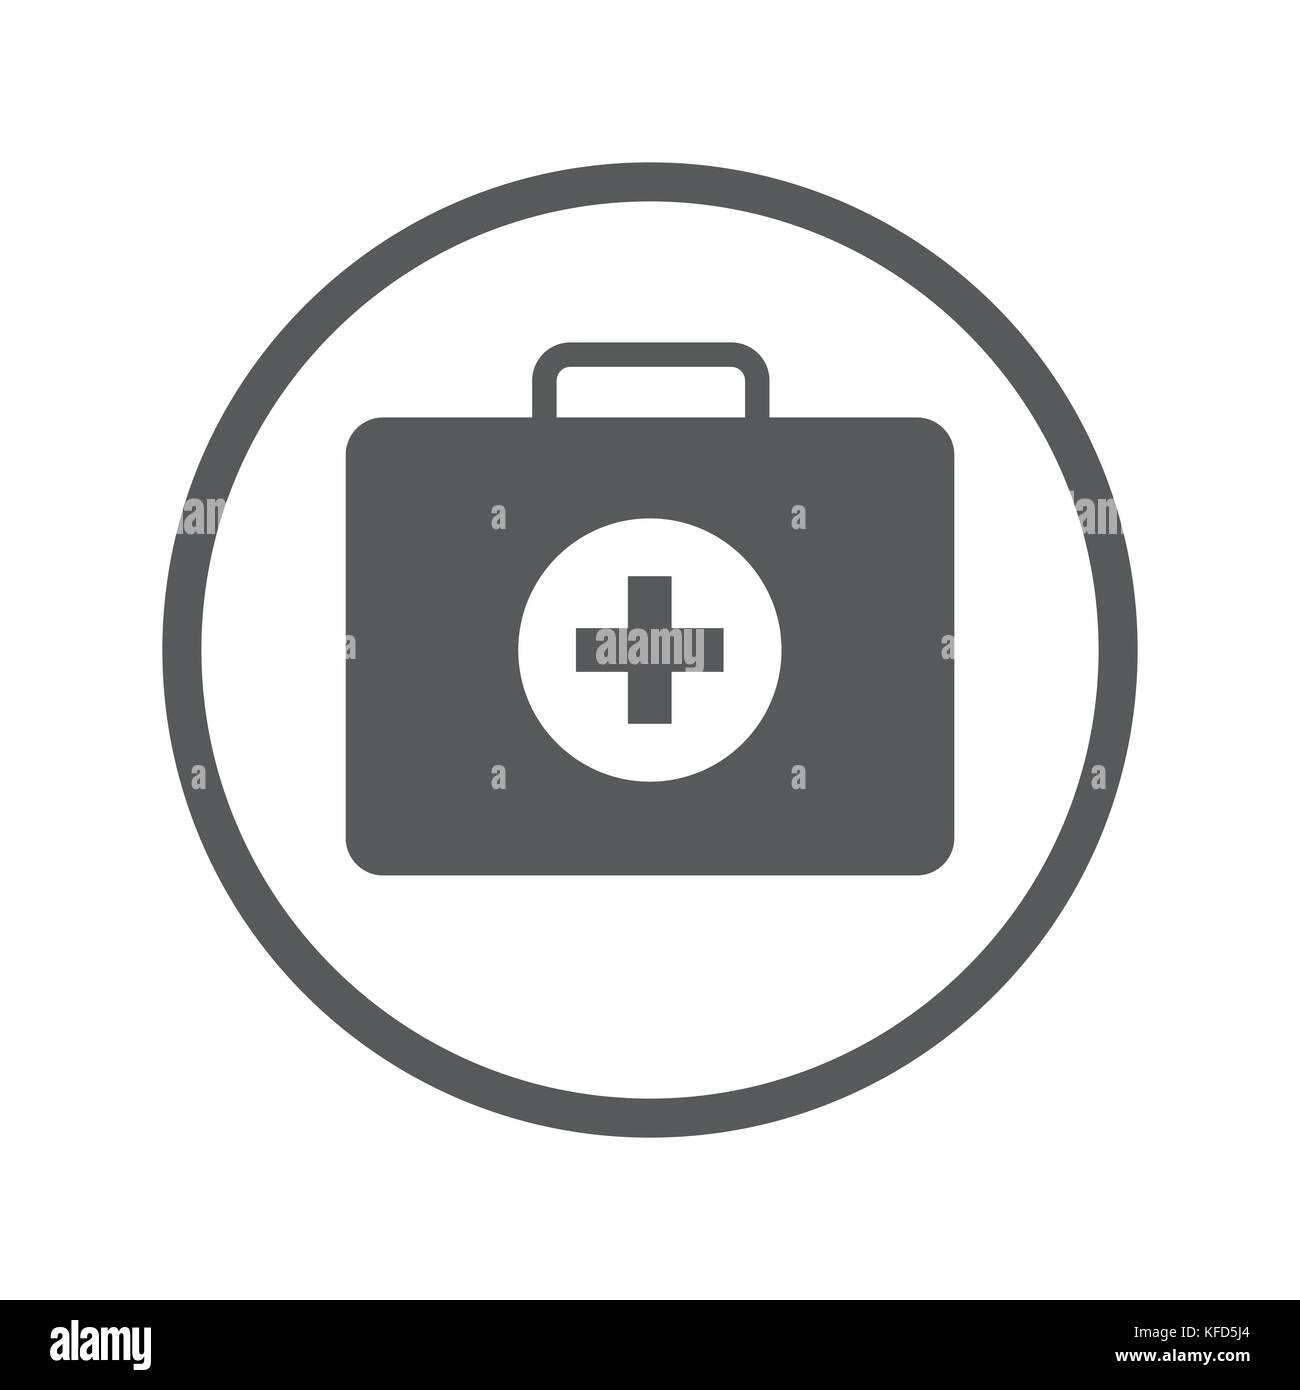 Linear First Aid Box icon, iconic symbol inside a circle, on white background. Vector Iconic Design. Stock Vector